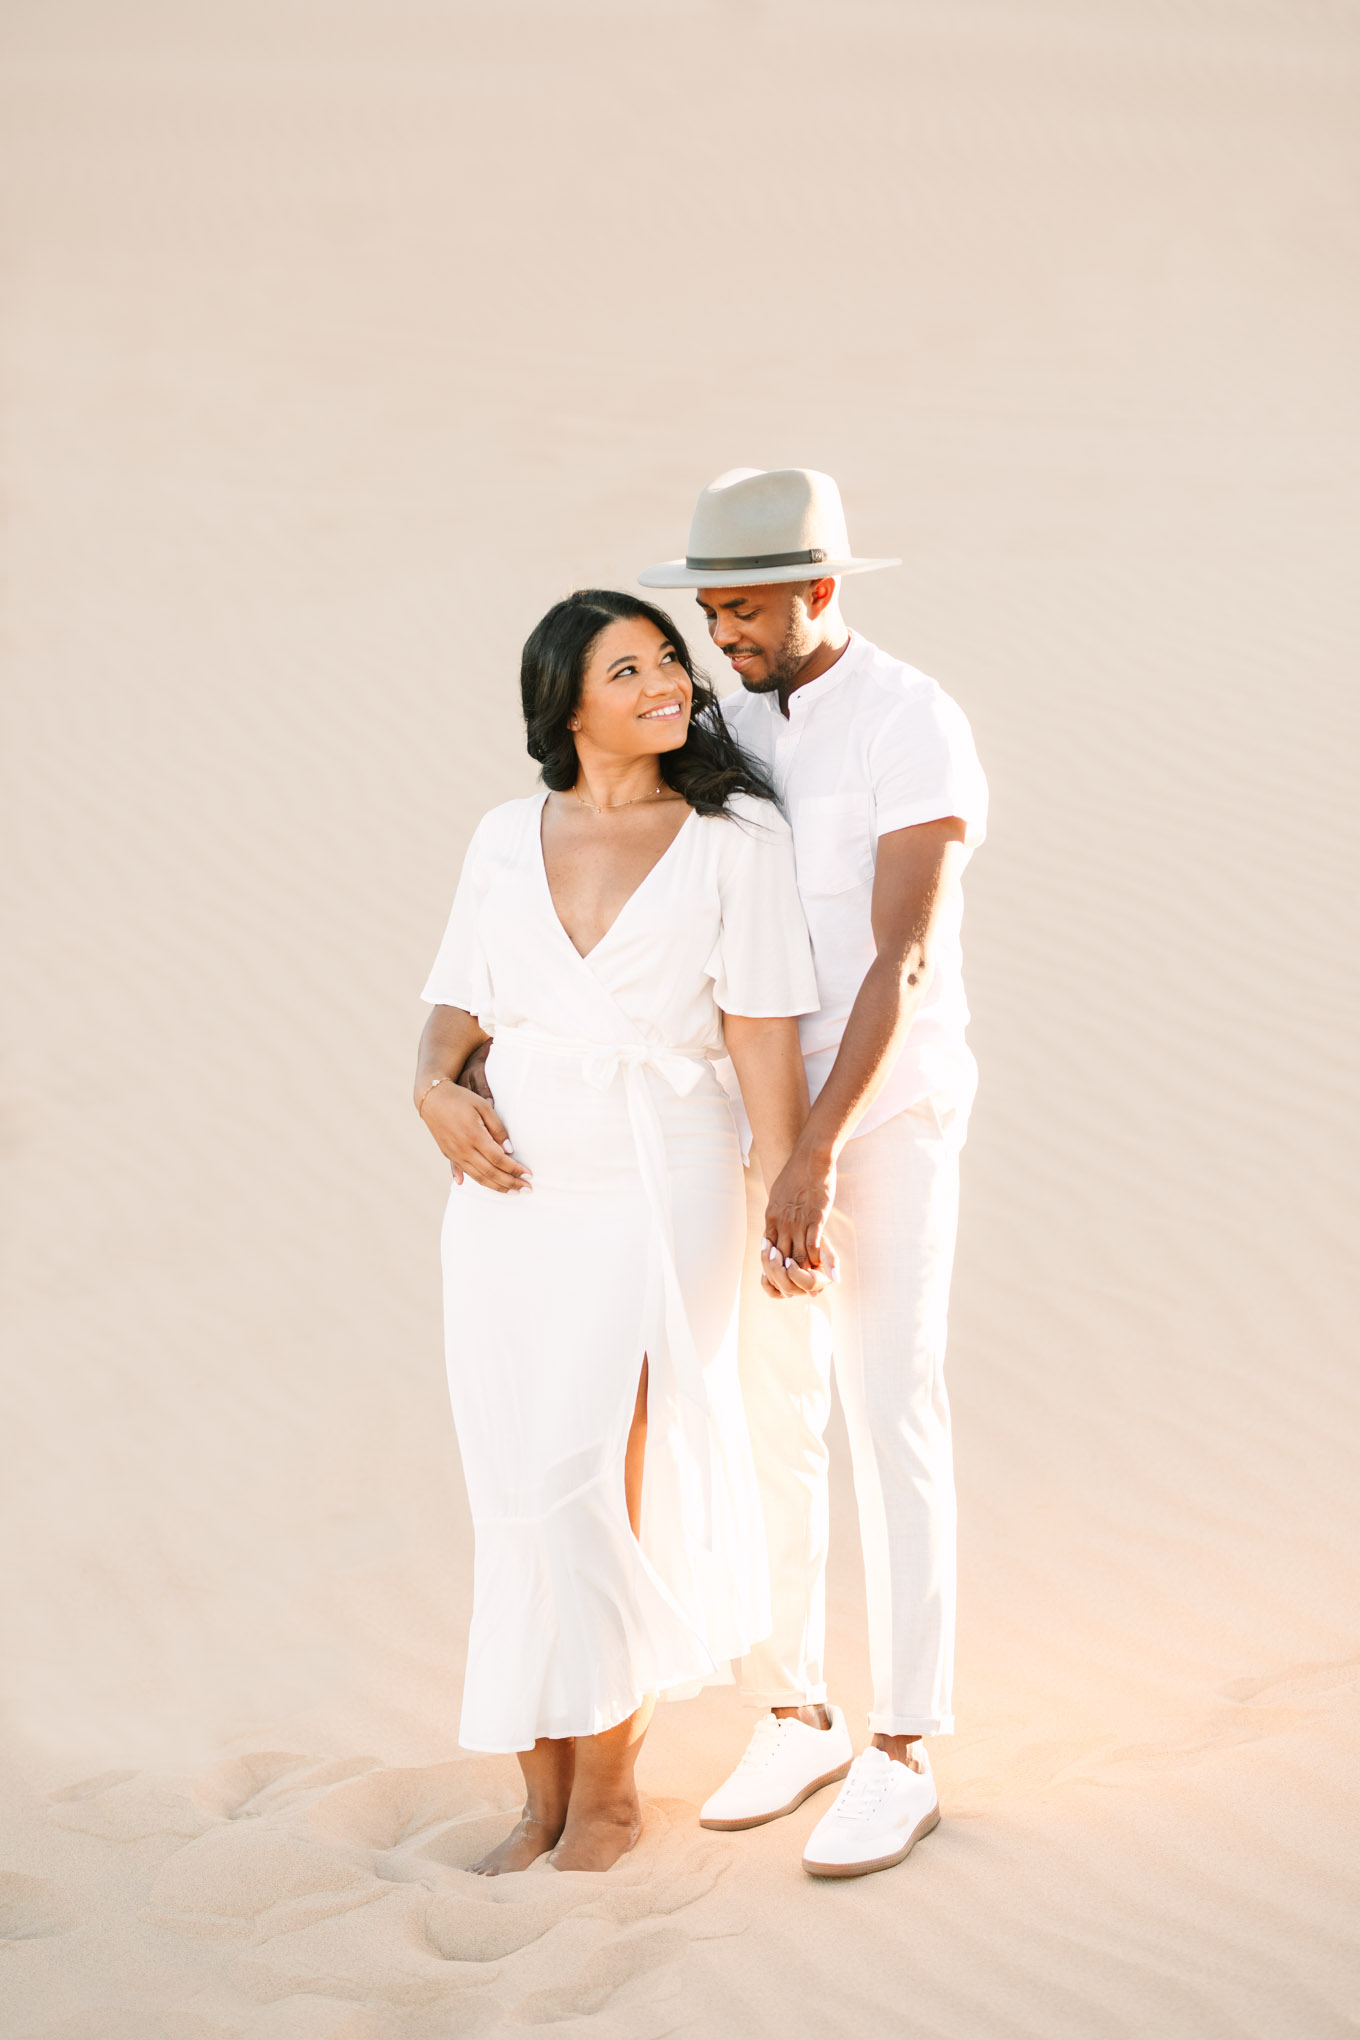 Bride to be gazing at her husband to be | California Sand Dunes engagement session | Colorful Palm Springs wedding photography | #palmspringsphotographer #sanddunes #engagementsession #southerncalifornia  Source: Mary Costa Photography | Los Angeles